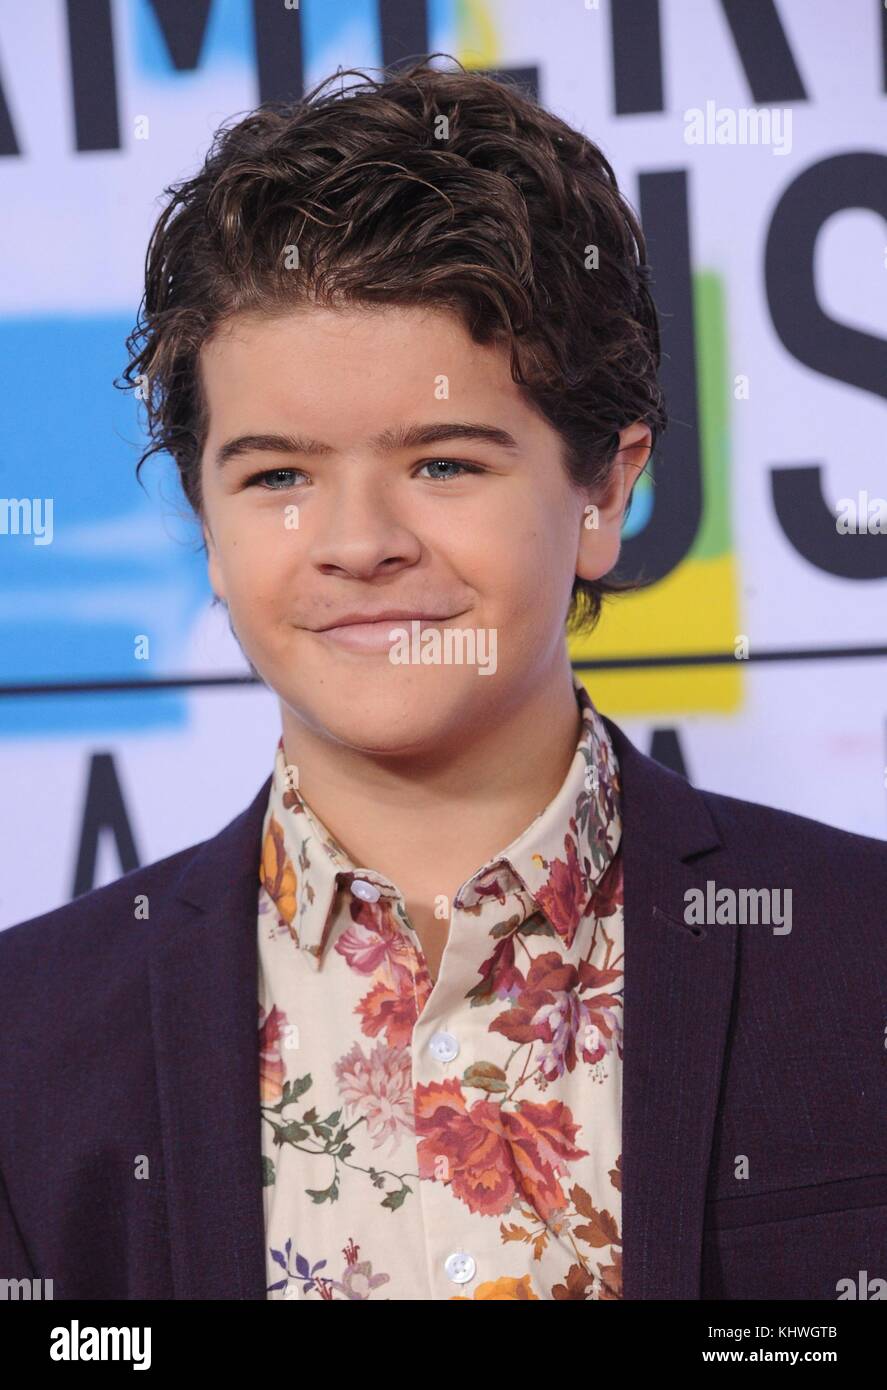 Los Angeles, CA, USA. 19th Nov, 2017. Gaten Matarazzo at arrivals for 2017 American Music Awards (AMAs) - Arrivals, Microsoft Theater, Los Angeles, CA November 19, 2017. Credit: Elizabeth Goodenough/Everett Collection/Alamy Live News Stock Photo